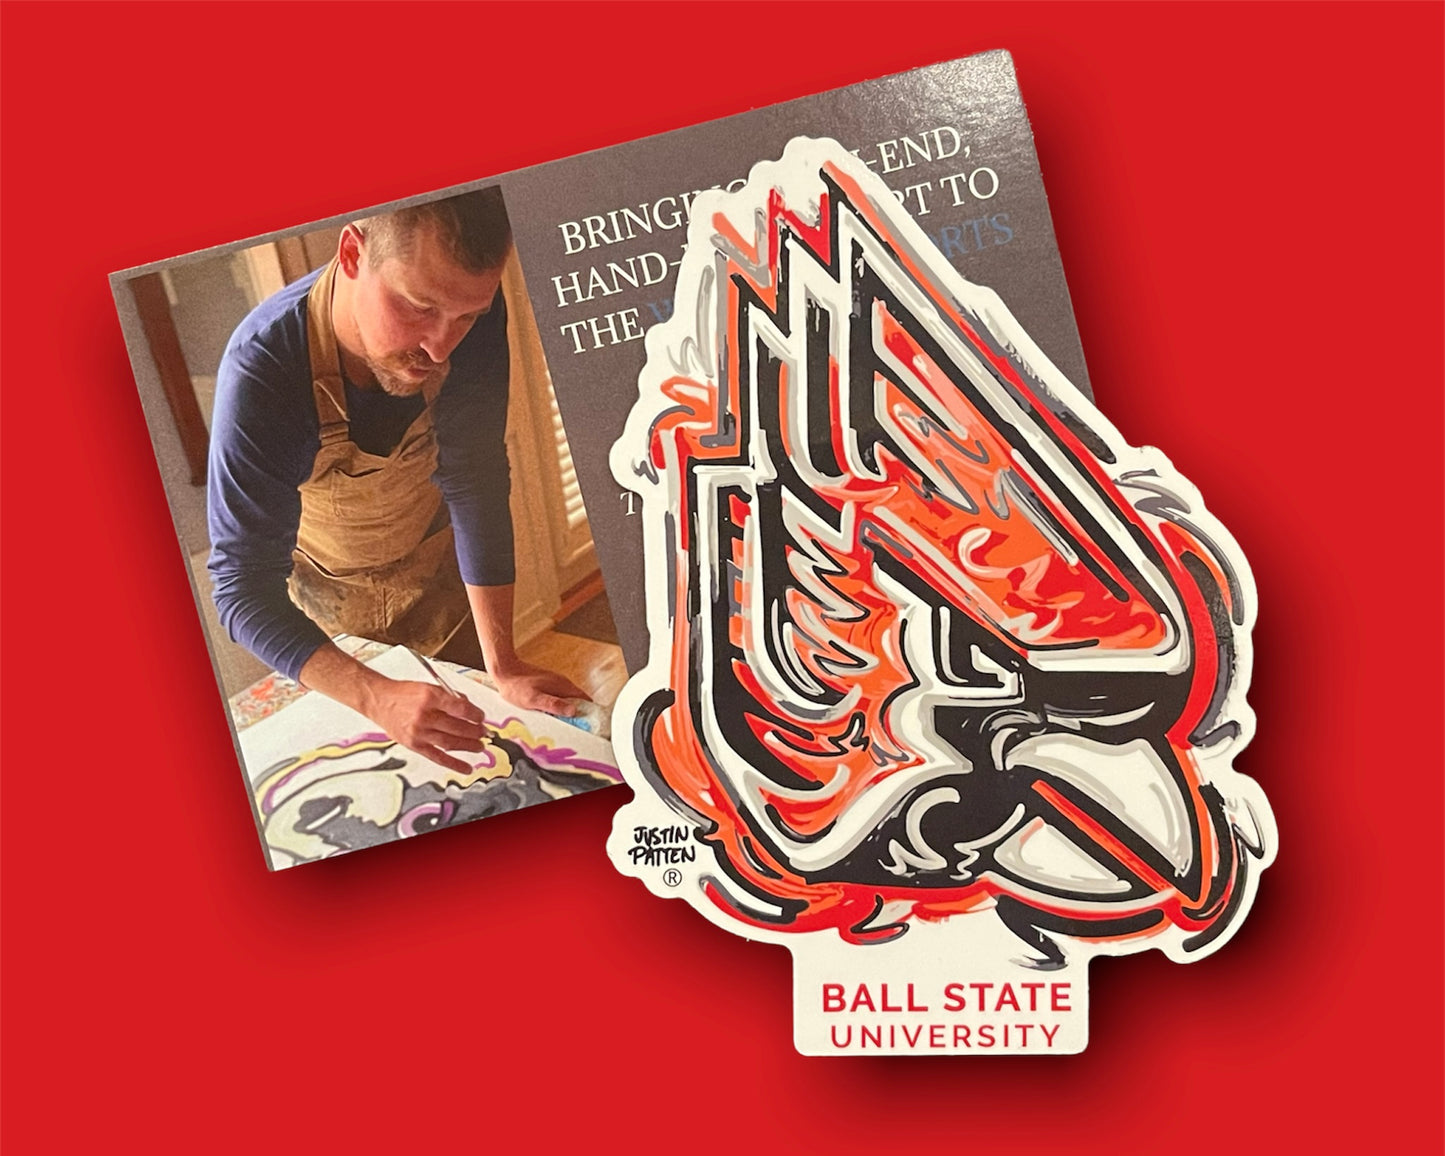 Ball State University Magnet by Justin Patten